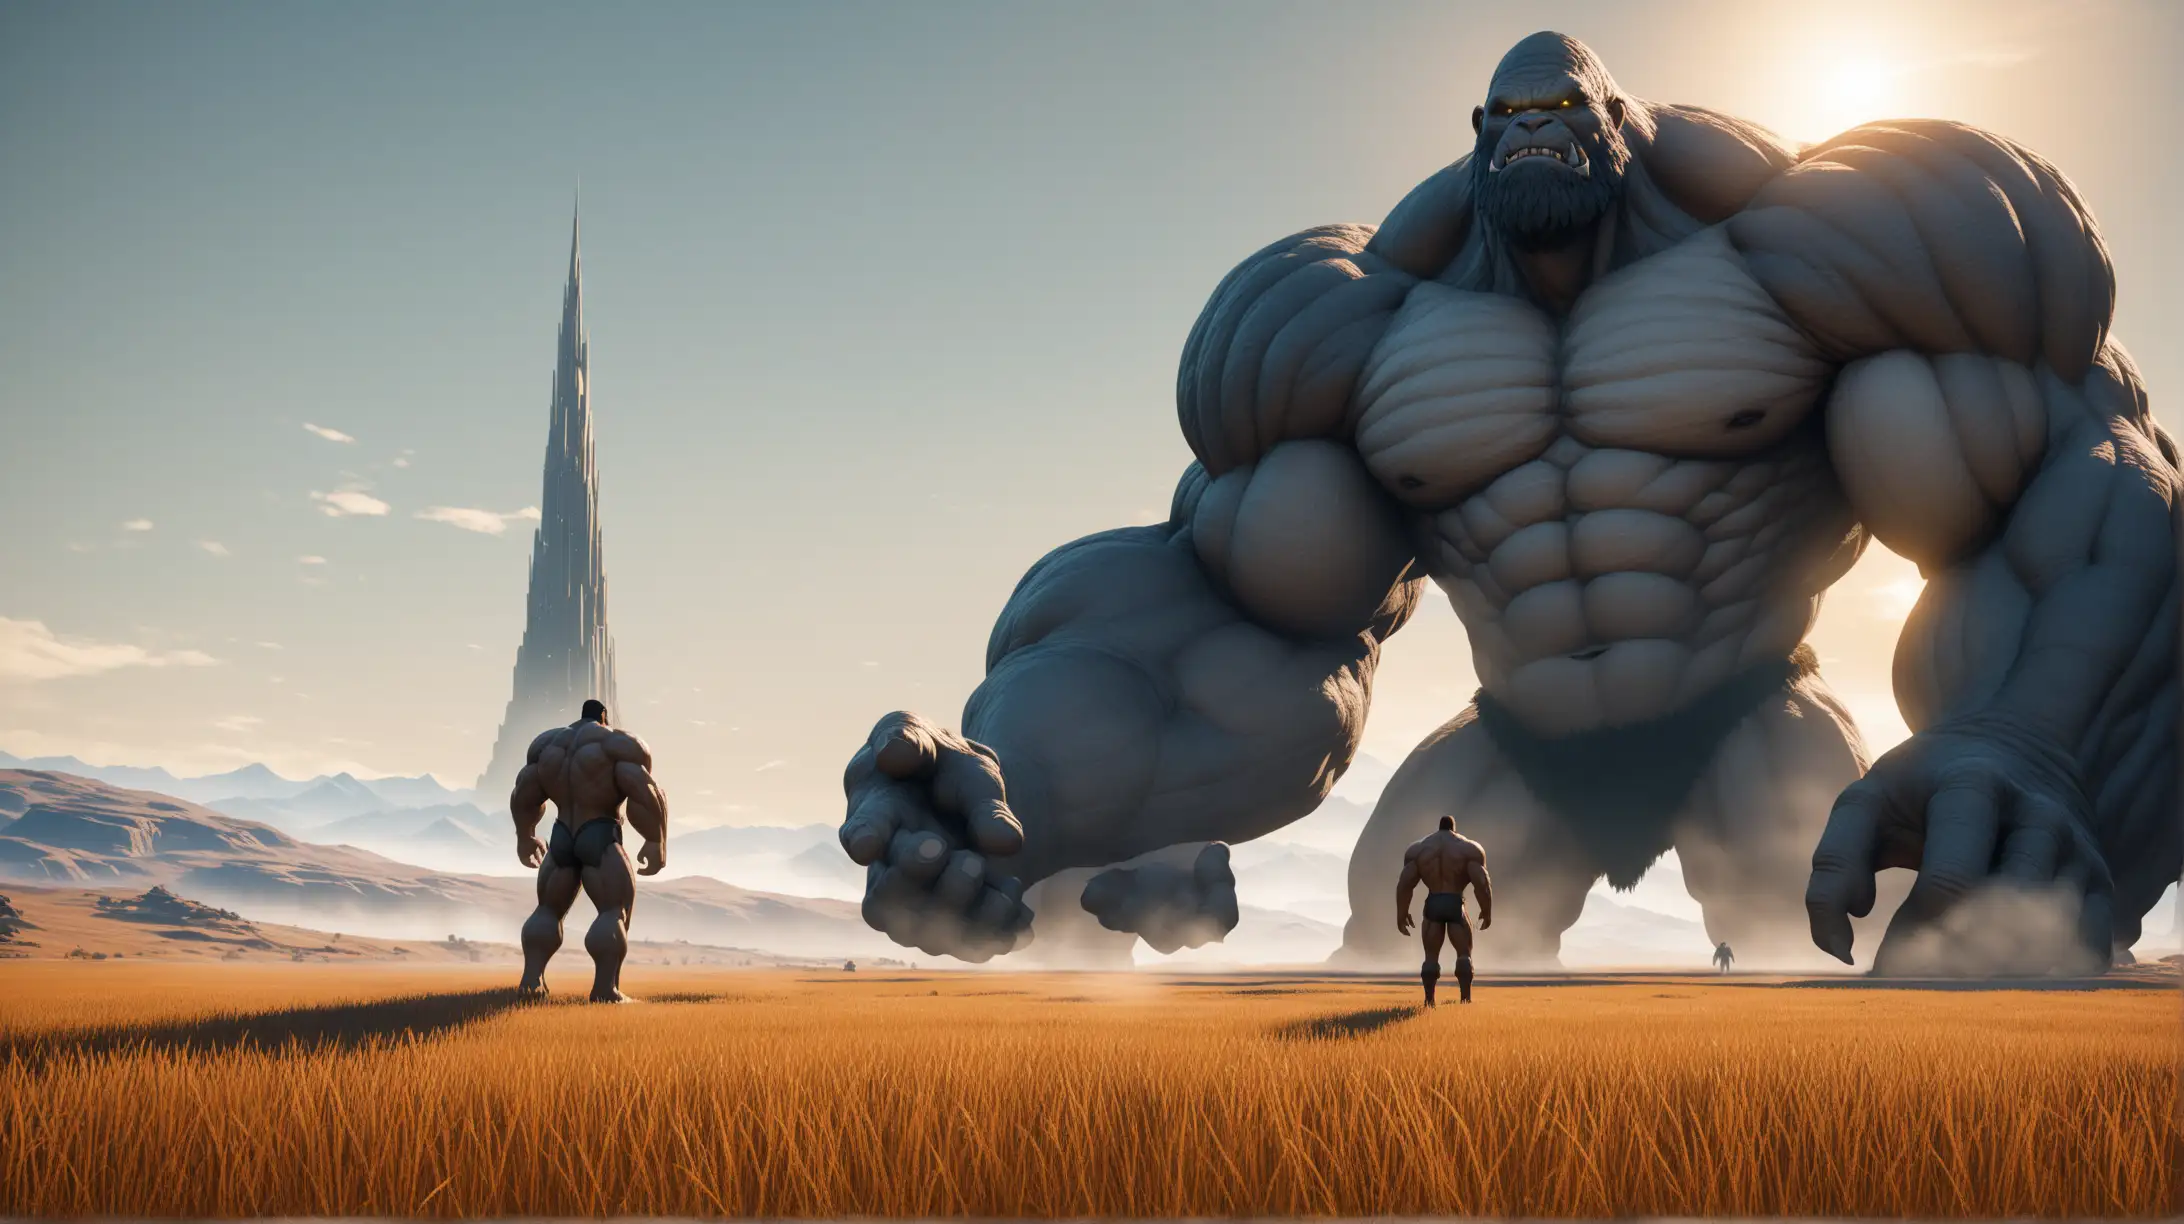 Giant Confrontation in Open Field Hyperreal 3D Animation